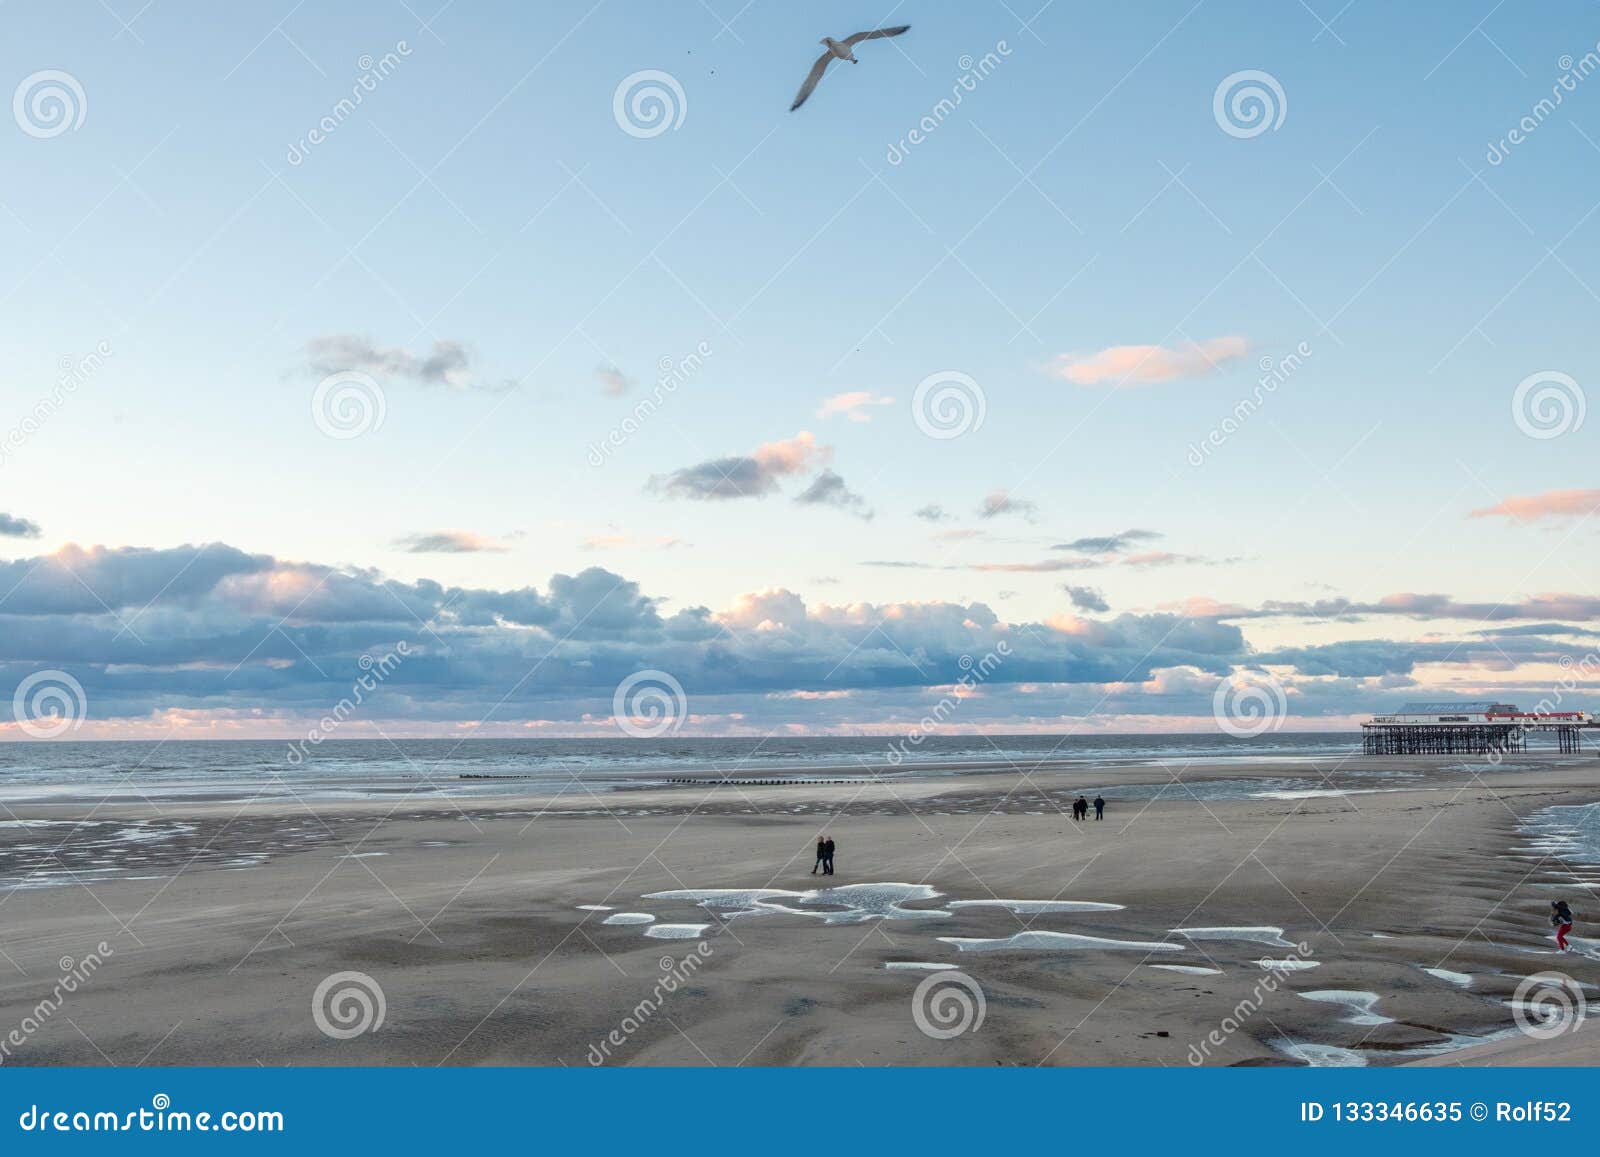 Blackpool Beach during fall. Unrecognizable tourists stroll on Blackpool Beach at sunset during an autumn weekend in late October 2018. Blackpool is one of Englands favorite seaside resorts.